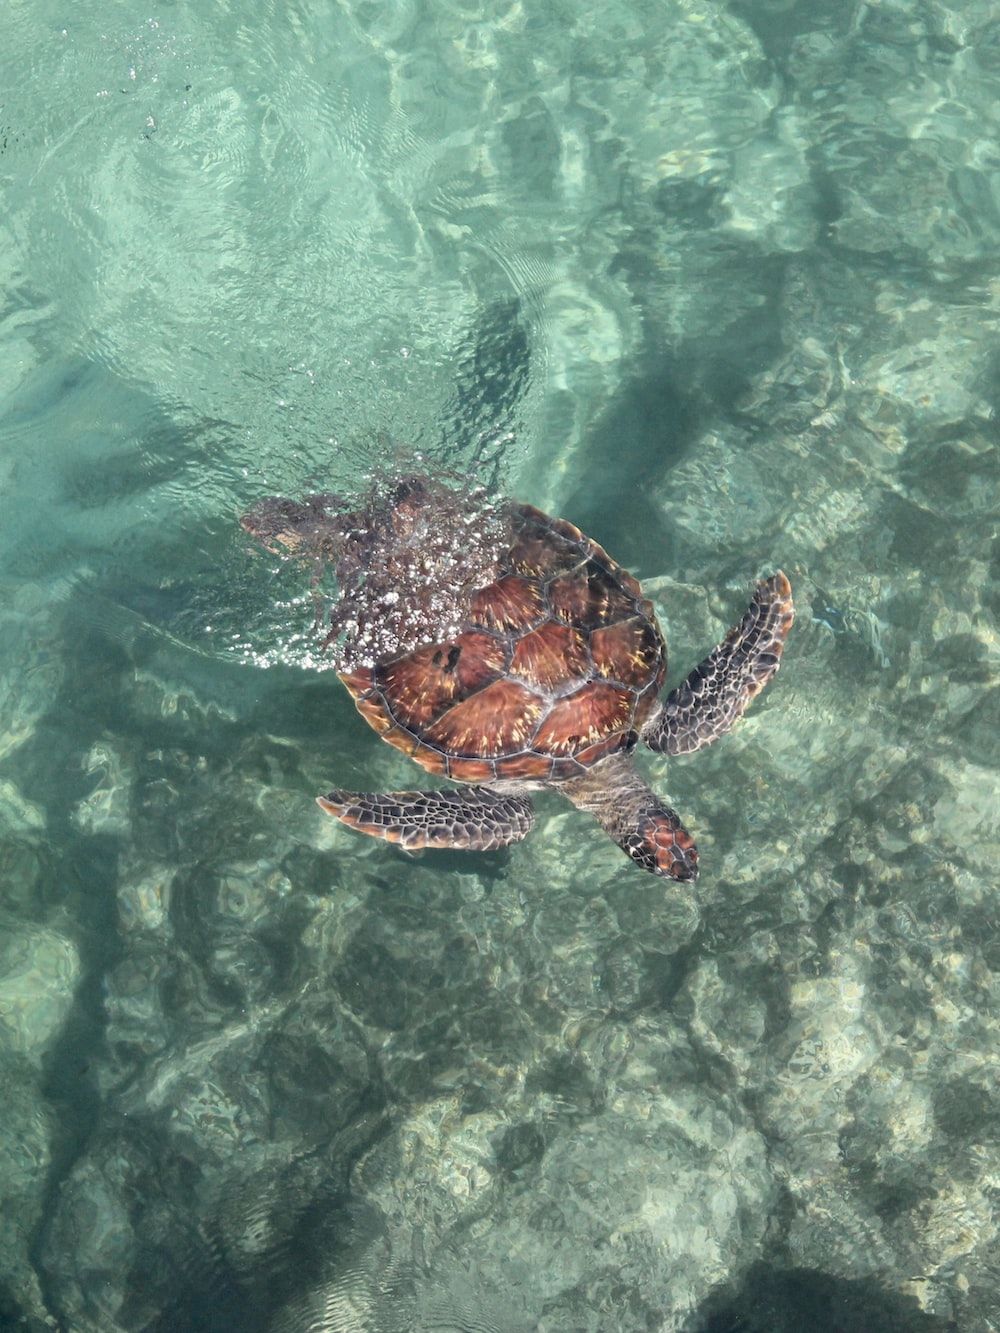 A turtle swimming in the ocean water - Turtle, sea turtle